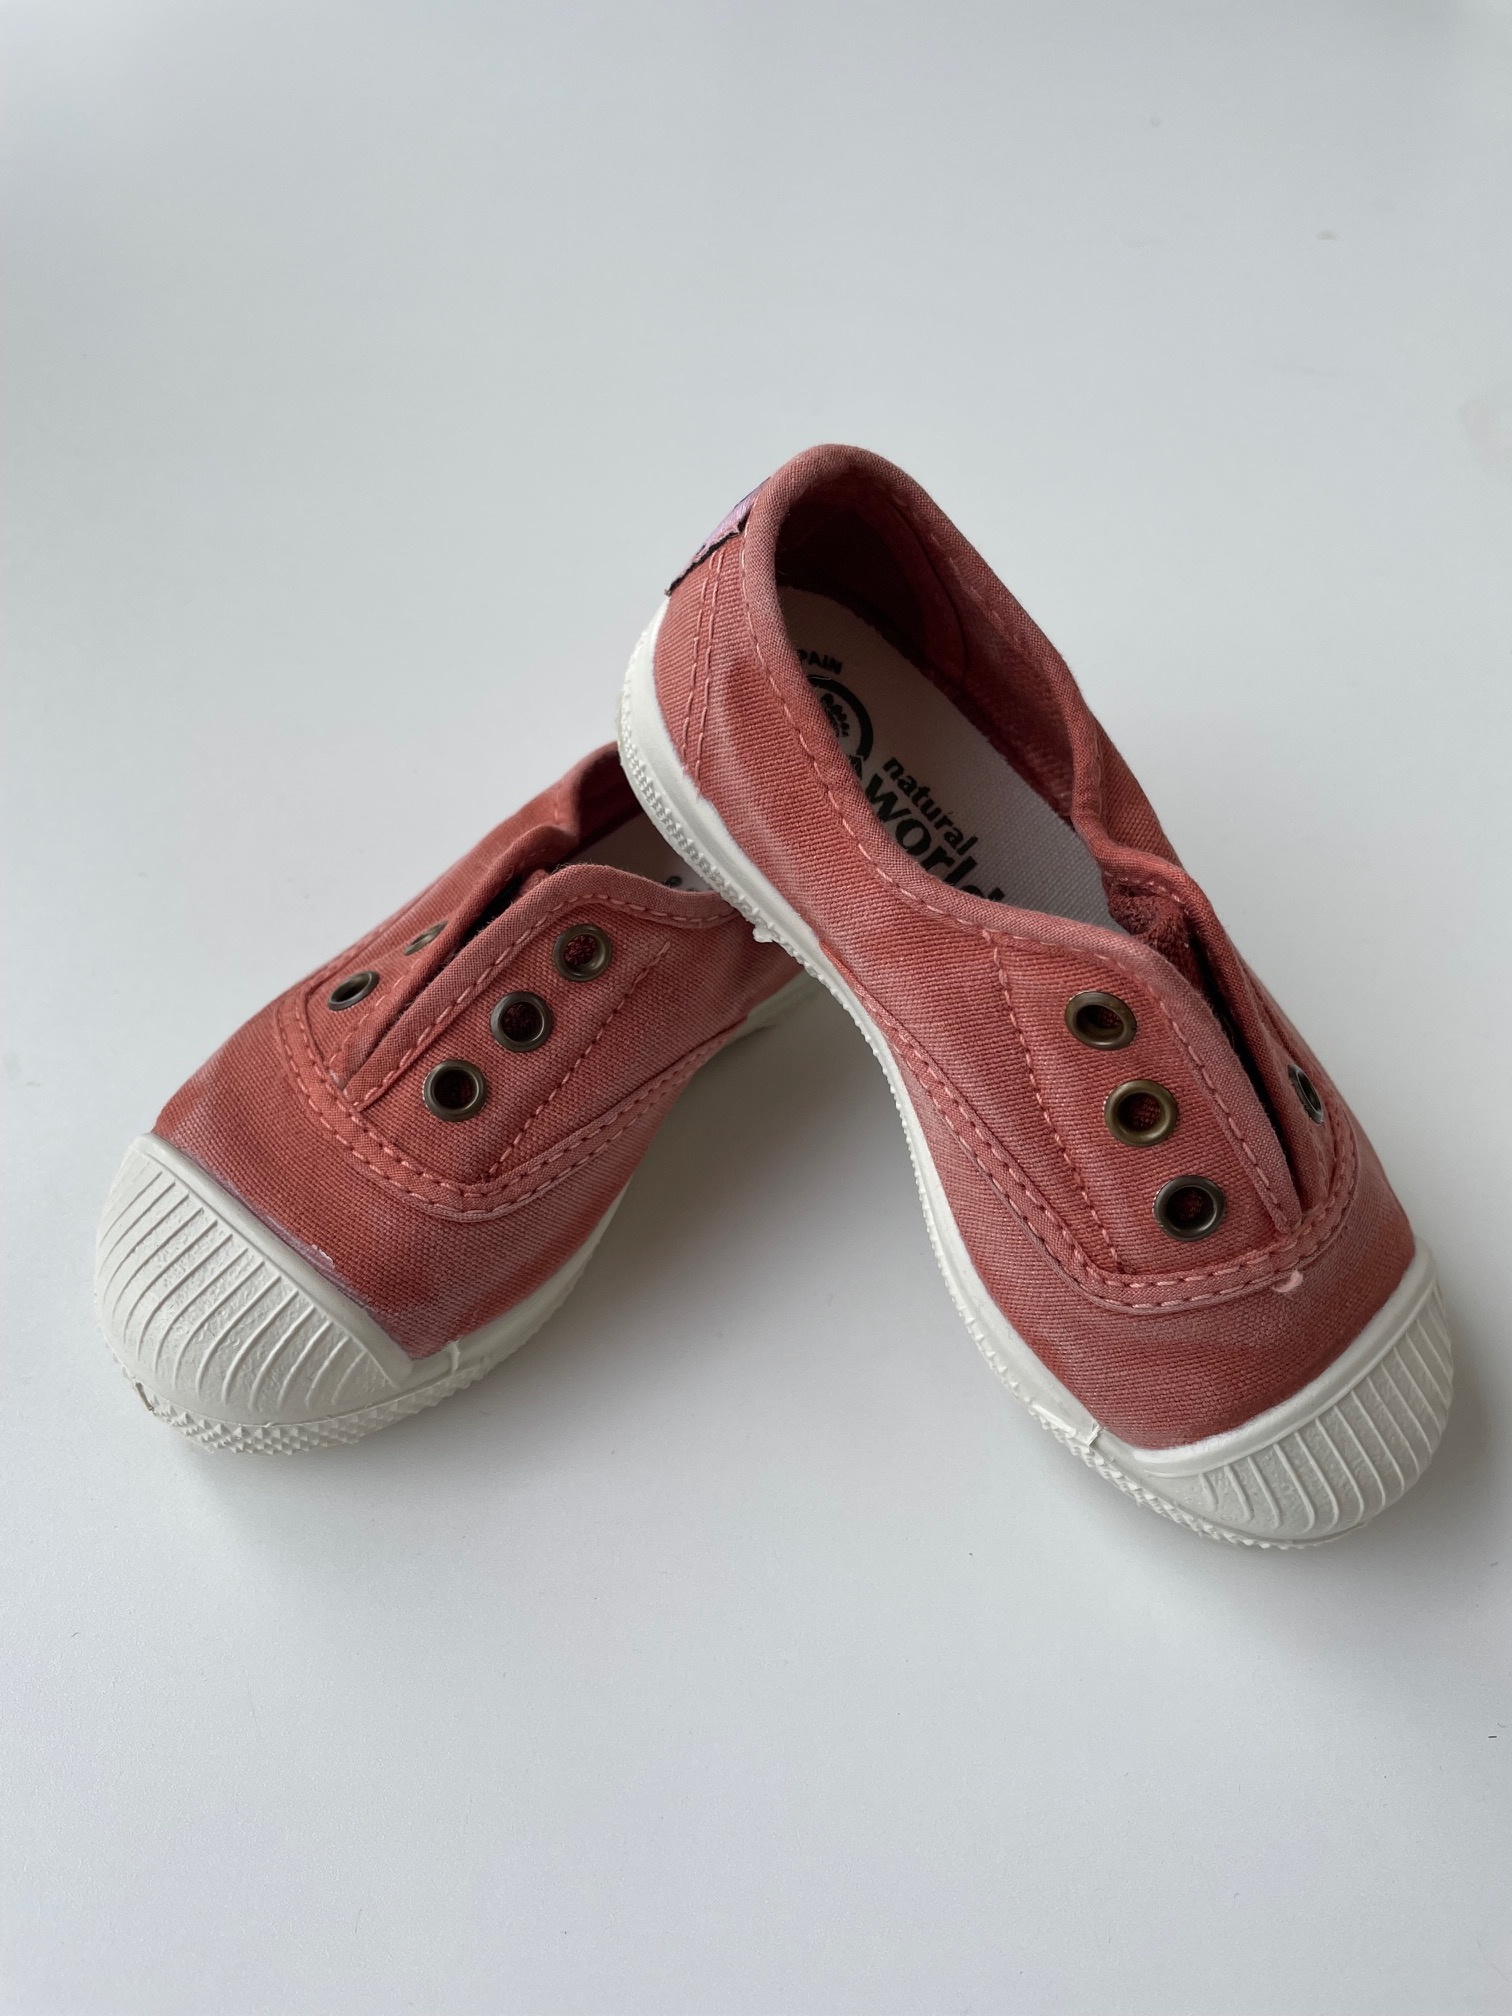 NATURAL WORLD eco kinder sneakers OLD LAVANDA - organic cotton - stone washed terracotta - 21 tm 34